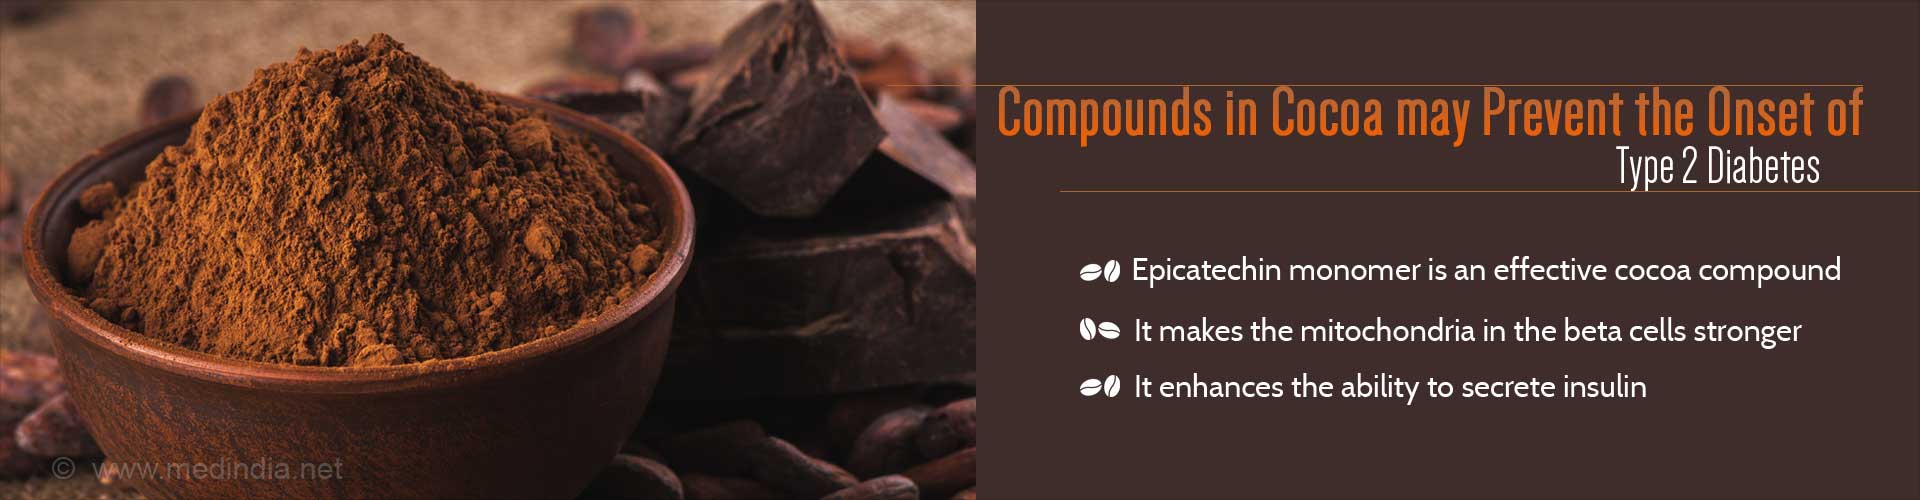 Compounds in cocoa may prevent the onset of Type 2 diabetes
- Epicatechin monomer is an effective cocoa compound
- It makes the mitochondria in the bets cells stronger
- It enhances the ability to secrete insulin